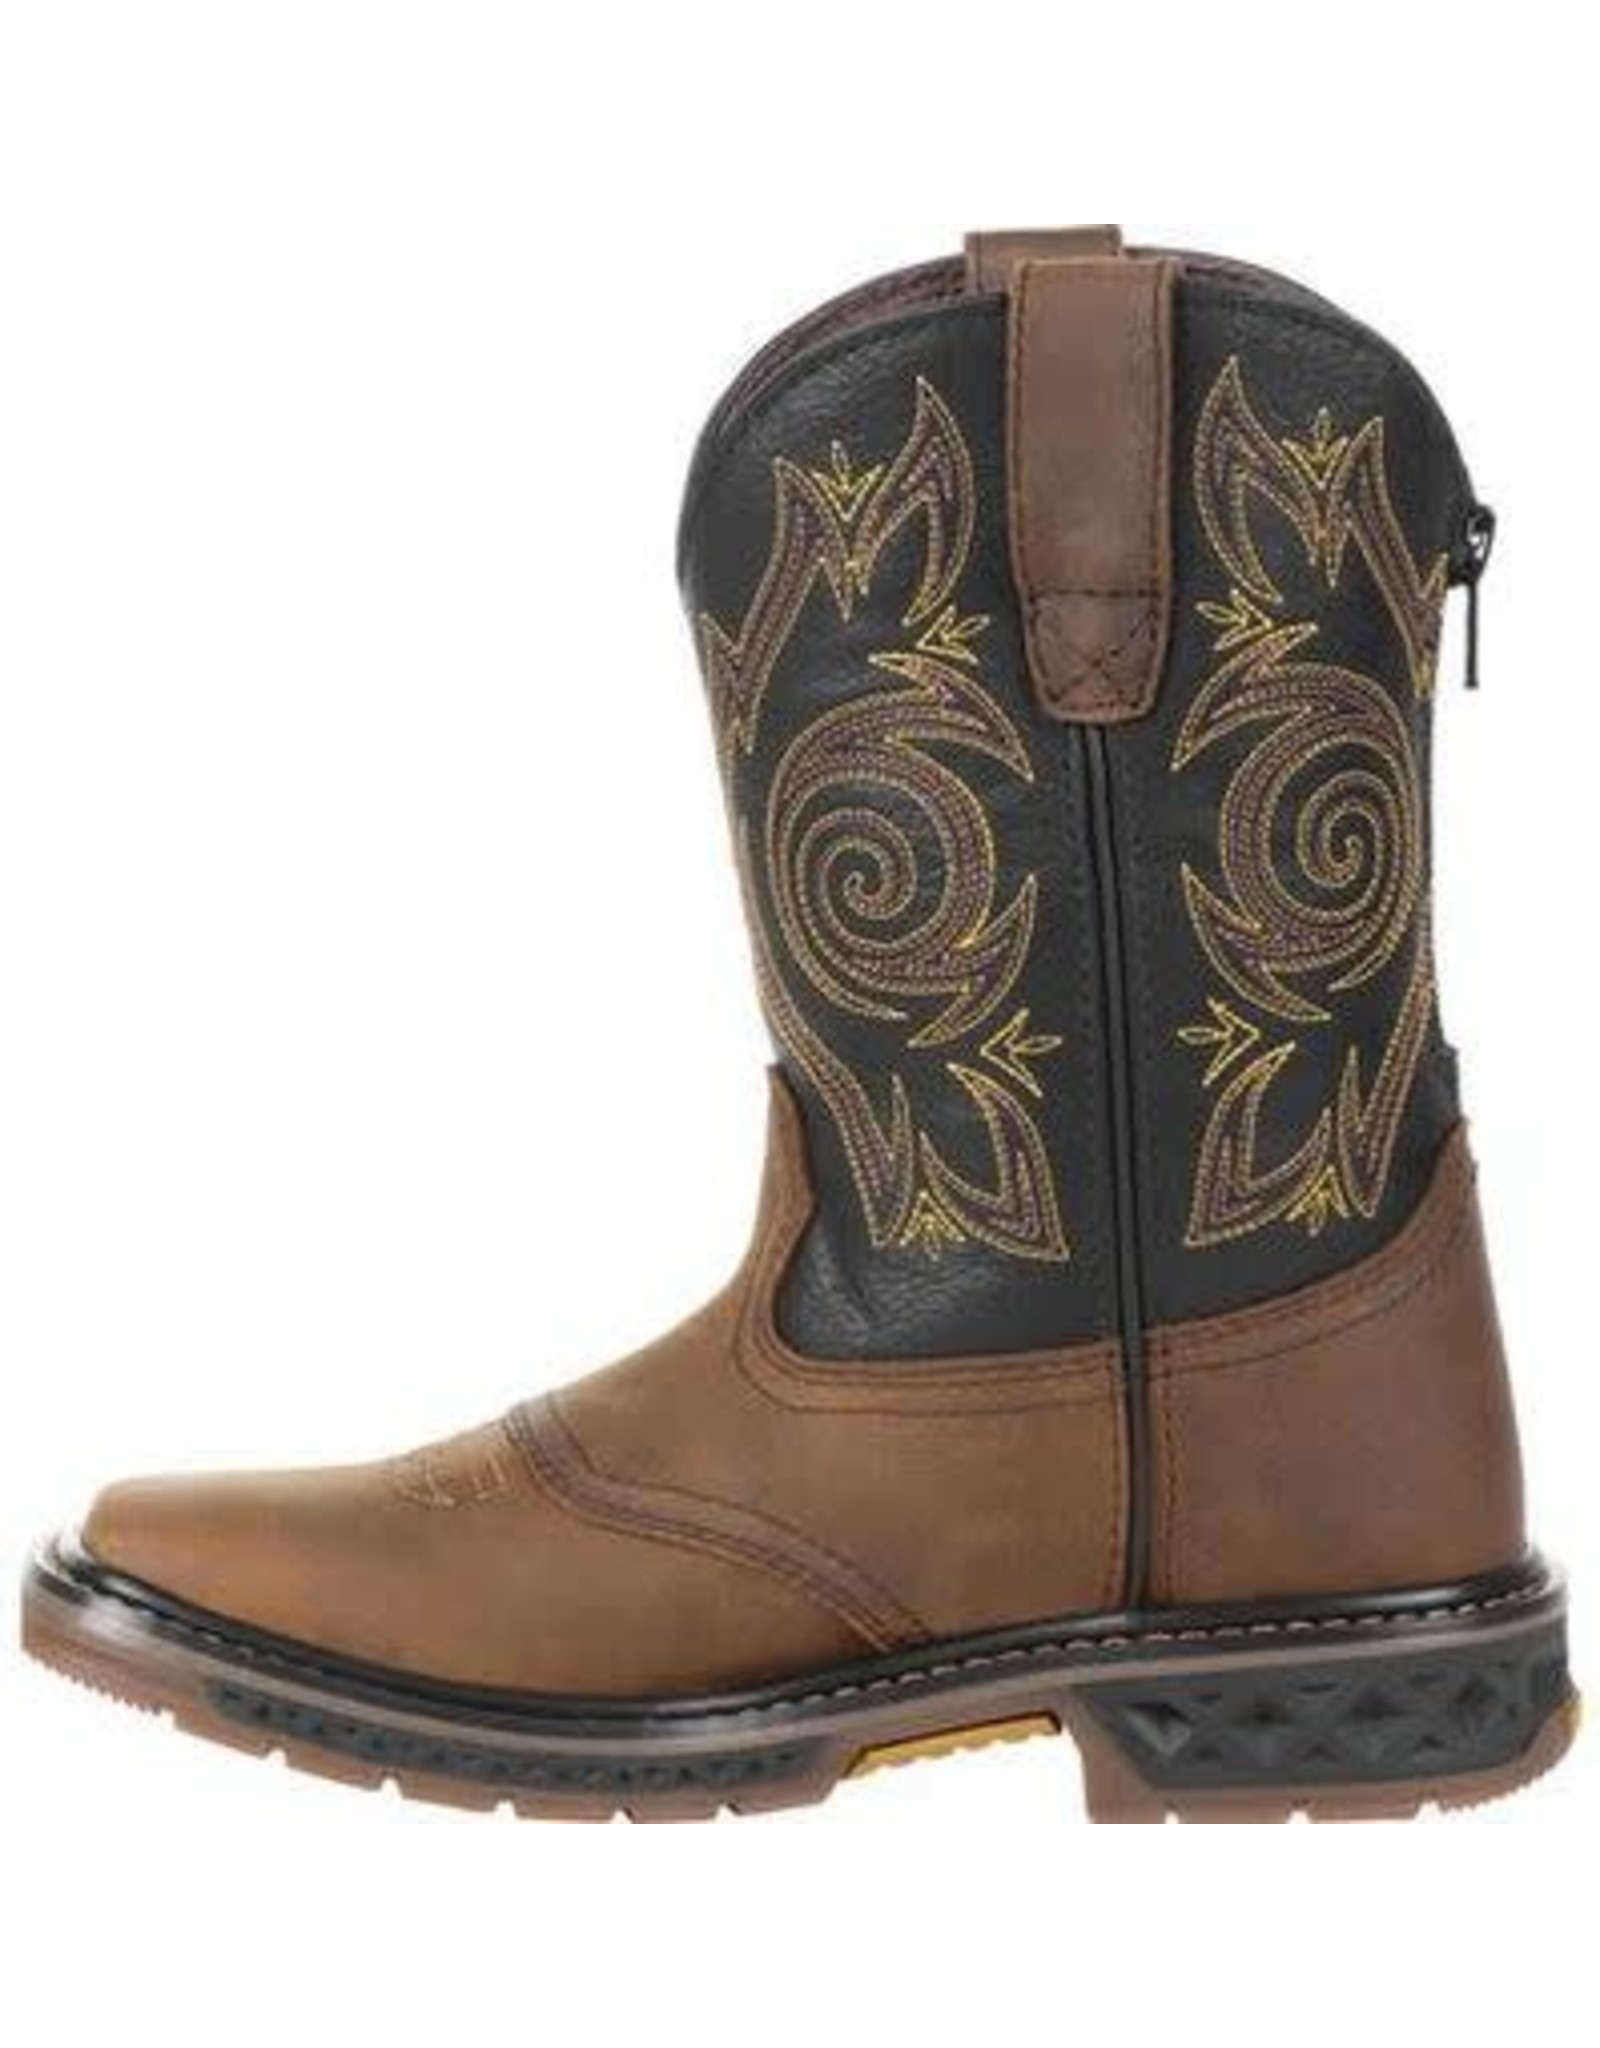 Georgia Carbotech GB00343 Kid's Boots Sz. 6y